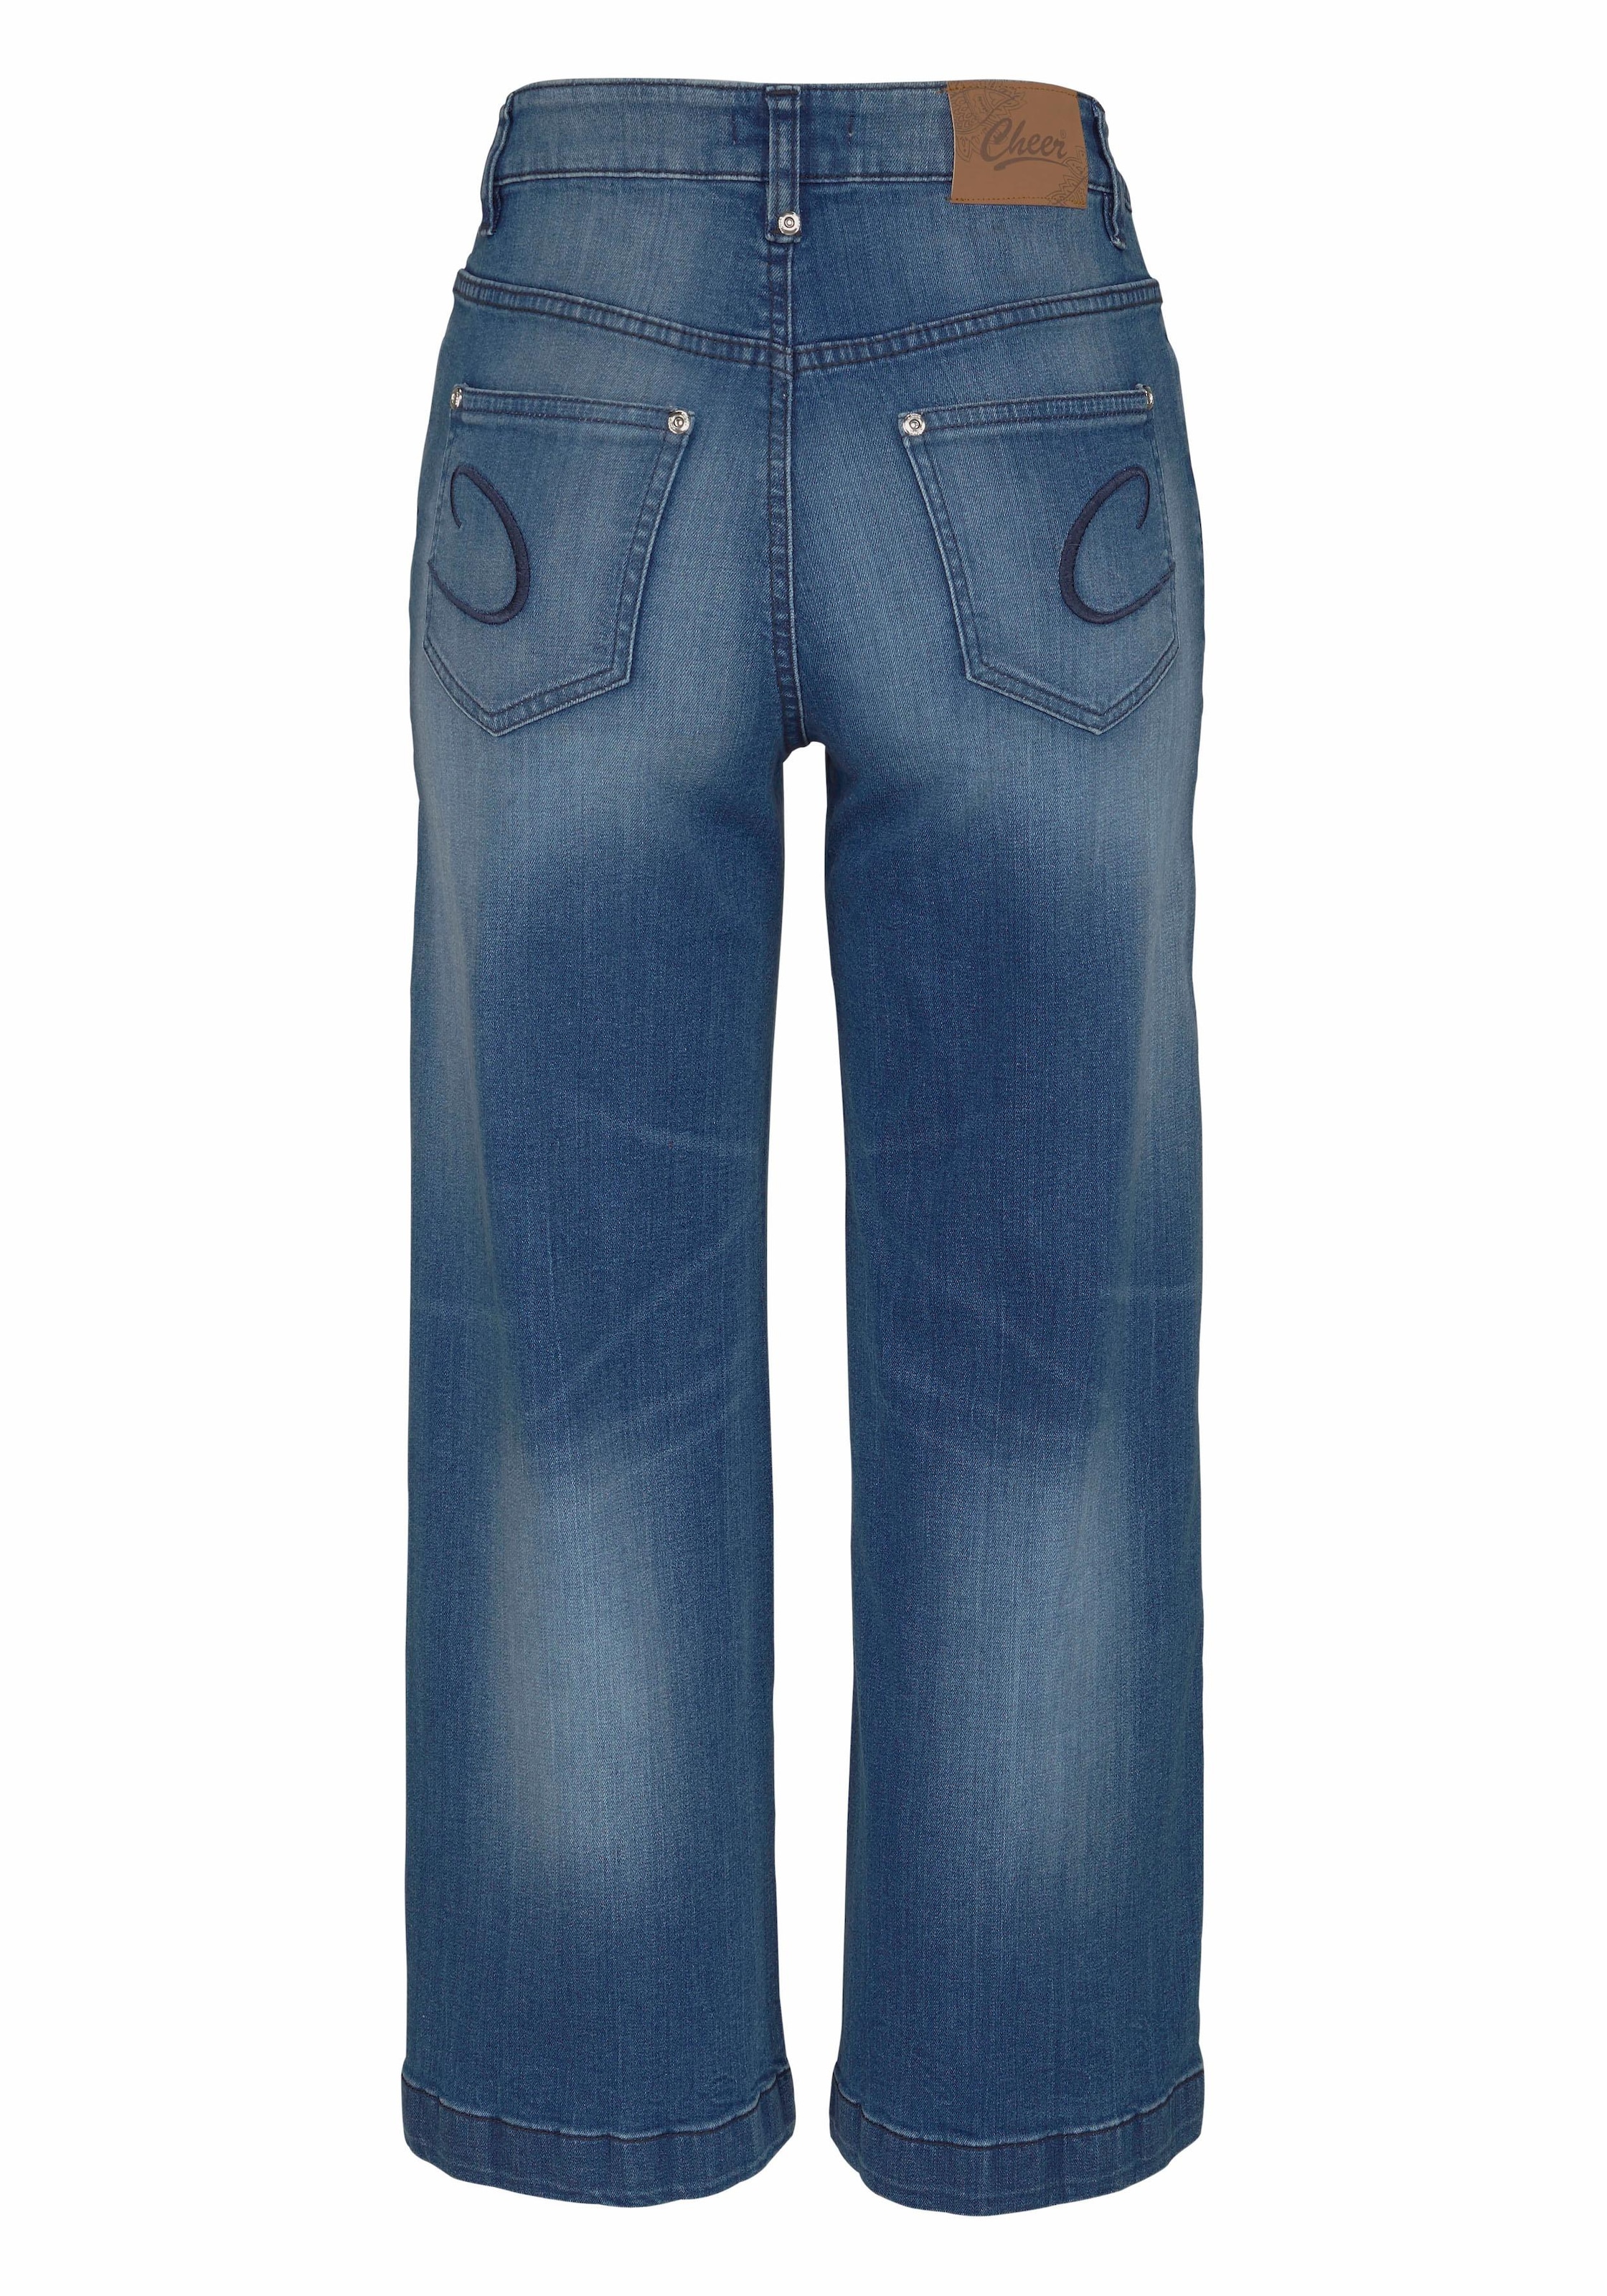 in CASUAL Aniston shoppen 7/8-Jeans, Used-Waschung